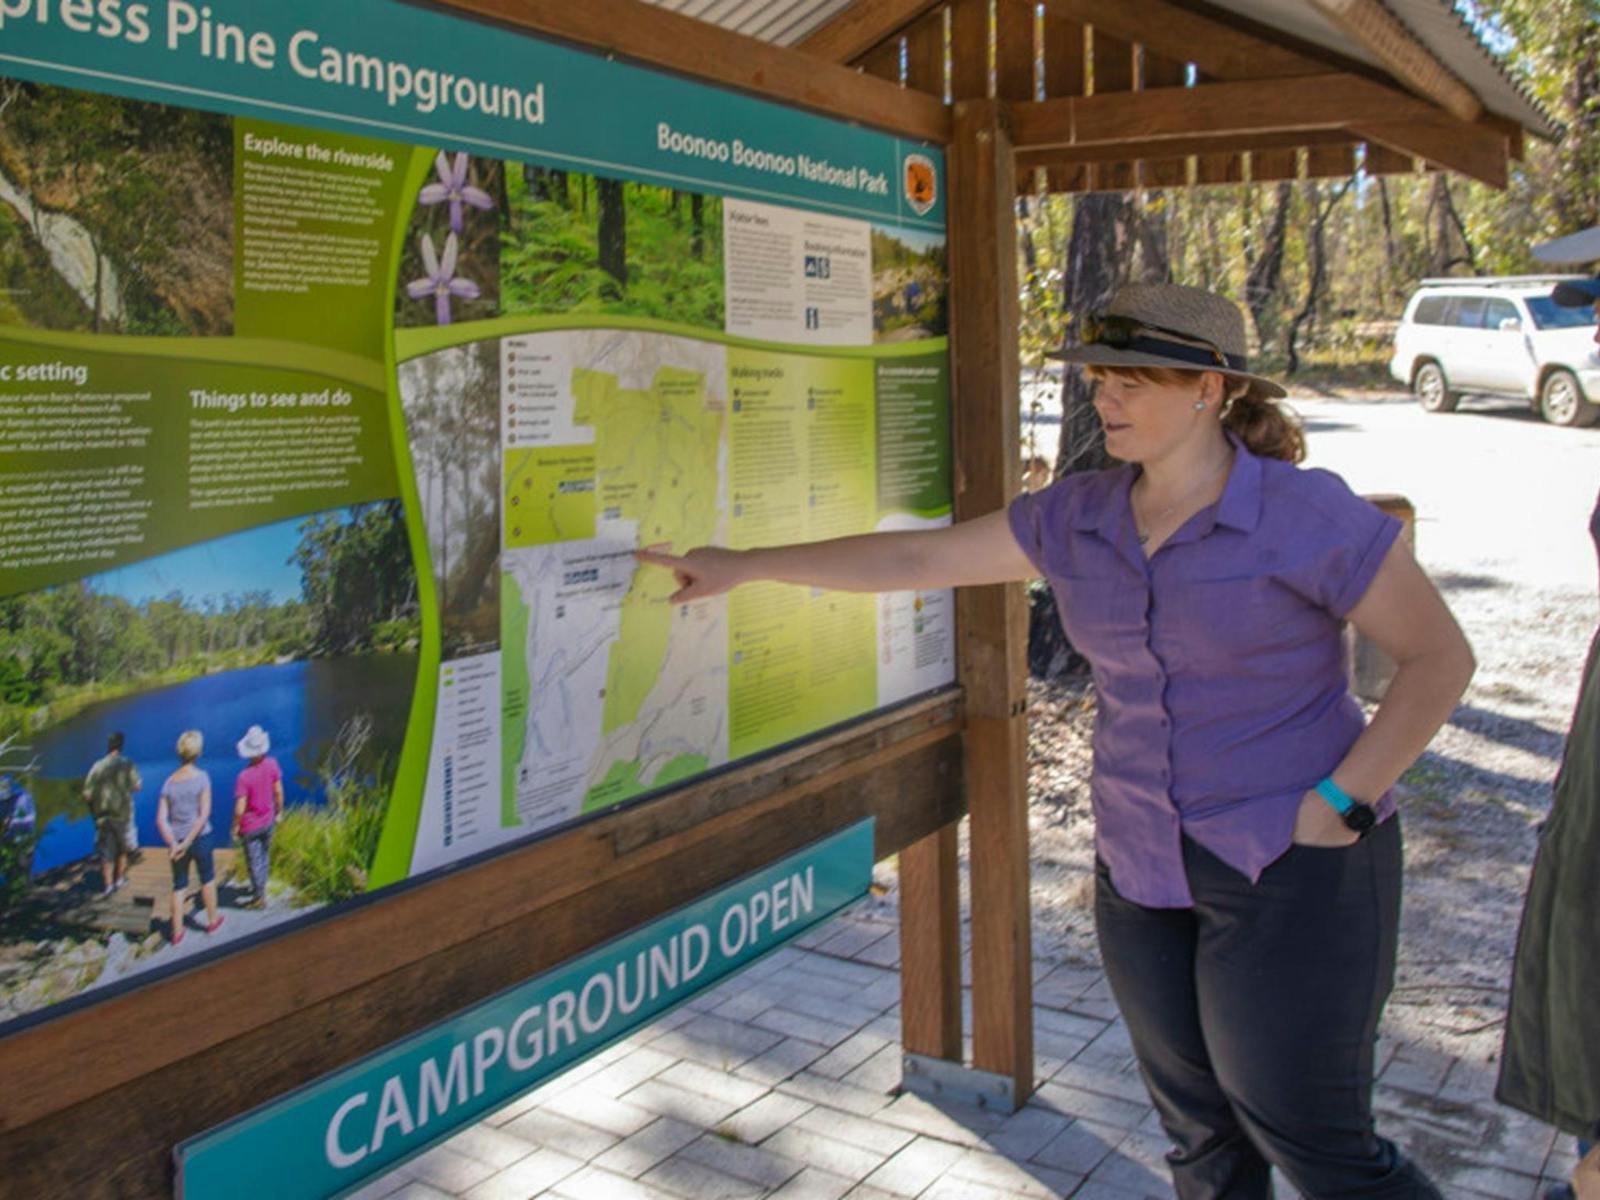 Visitors reading the Cypress Pine campground sign. Credit: Joshua J Smith © DPIE